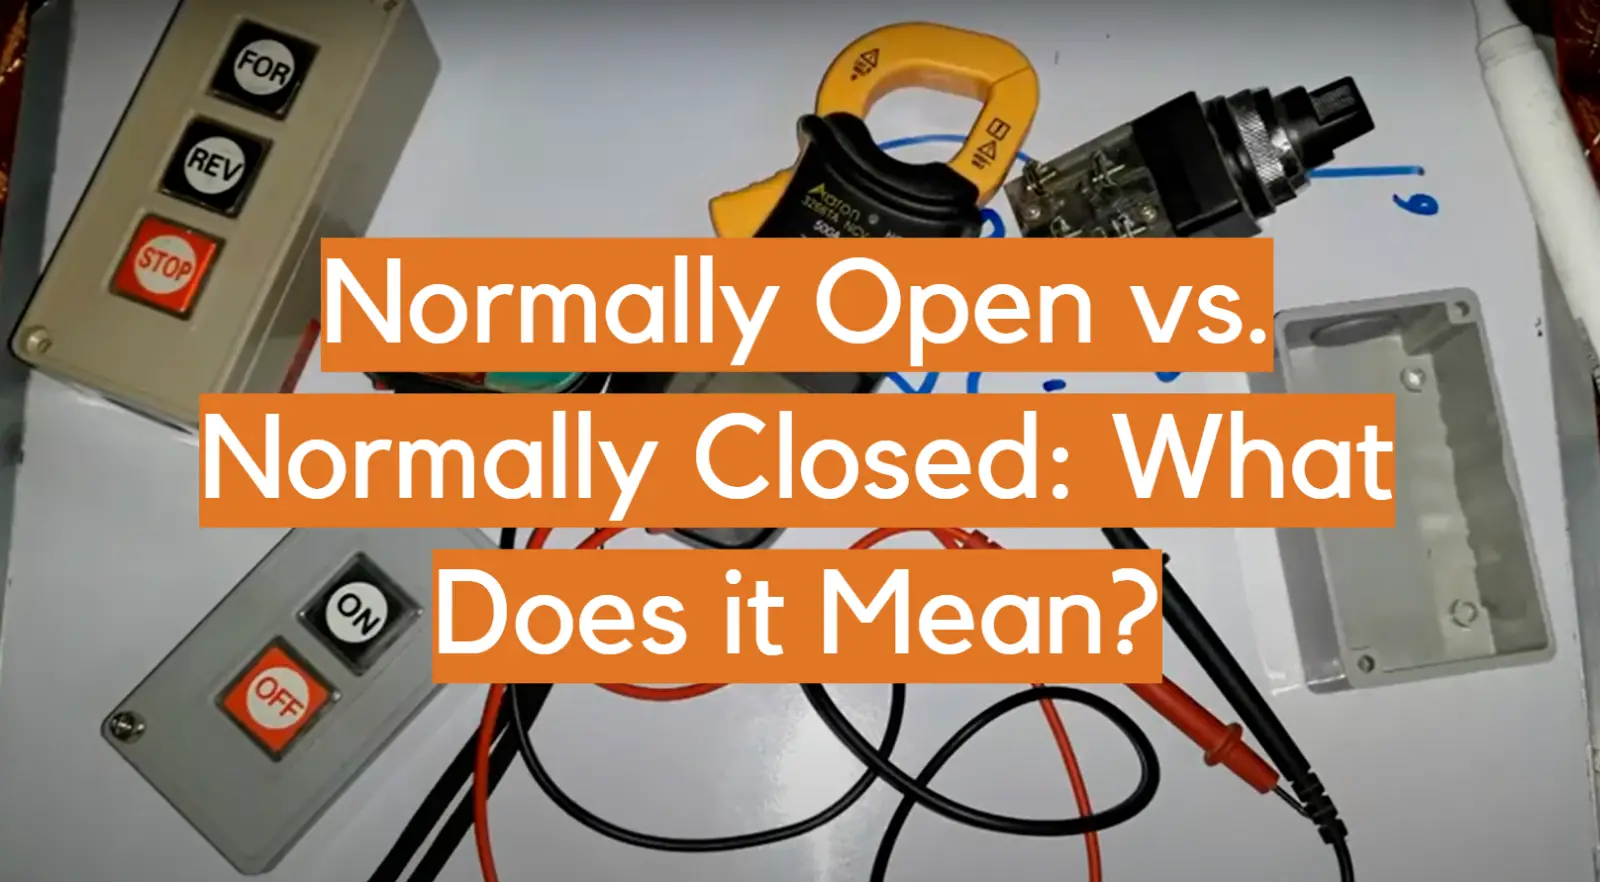 Normally Open vs. Normally Closed: What Does it Mean?